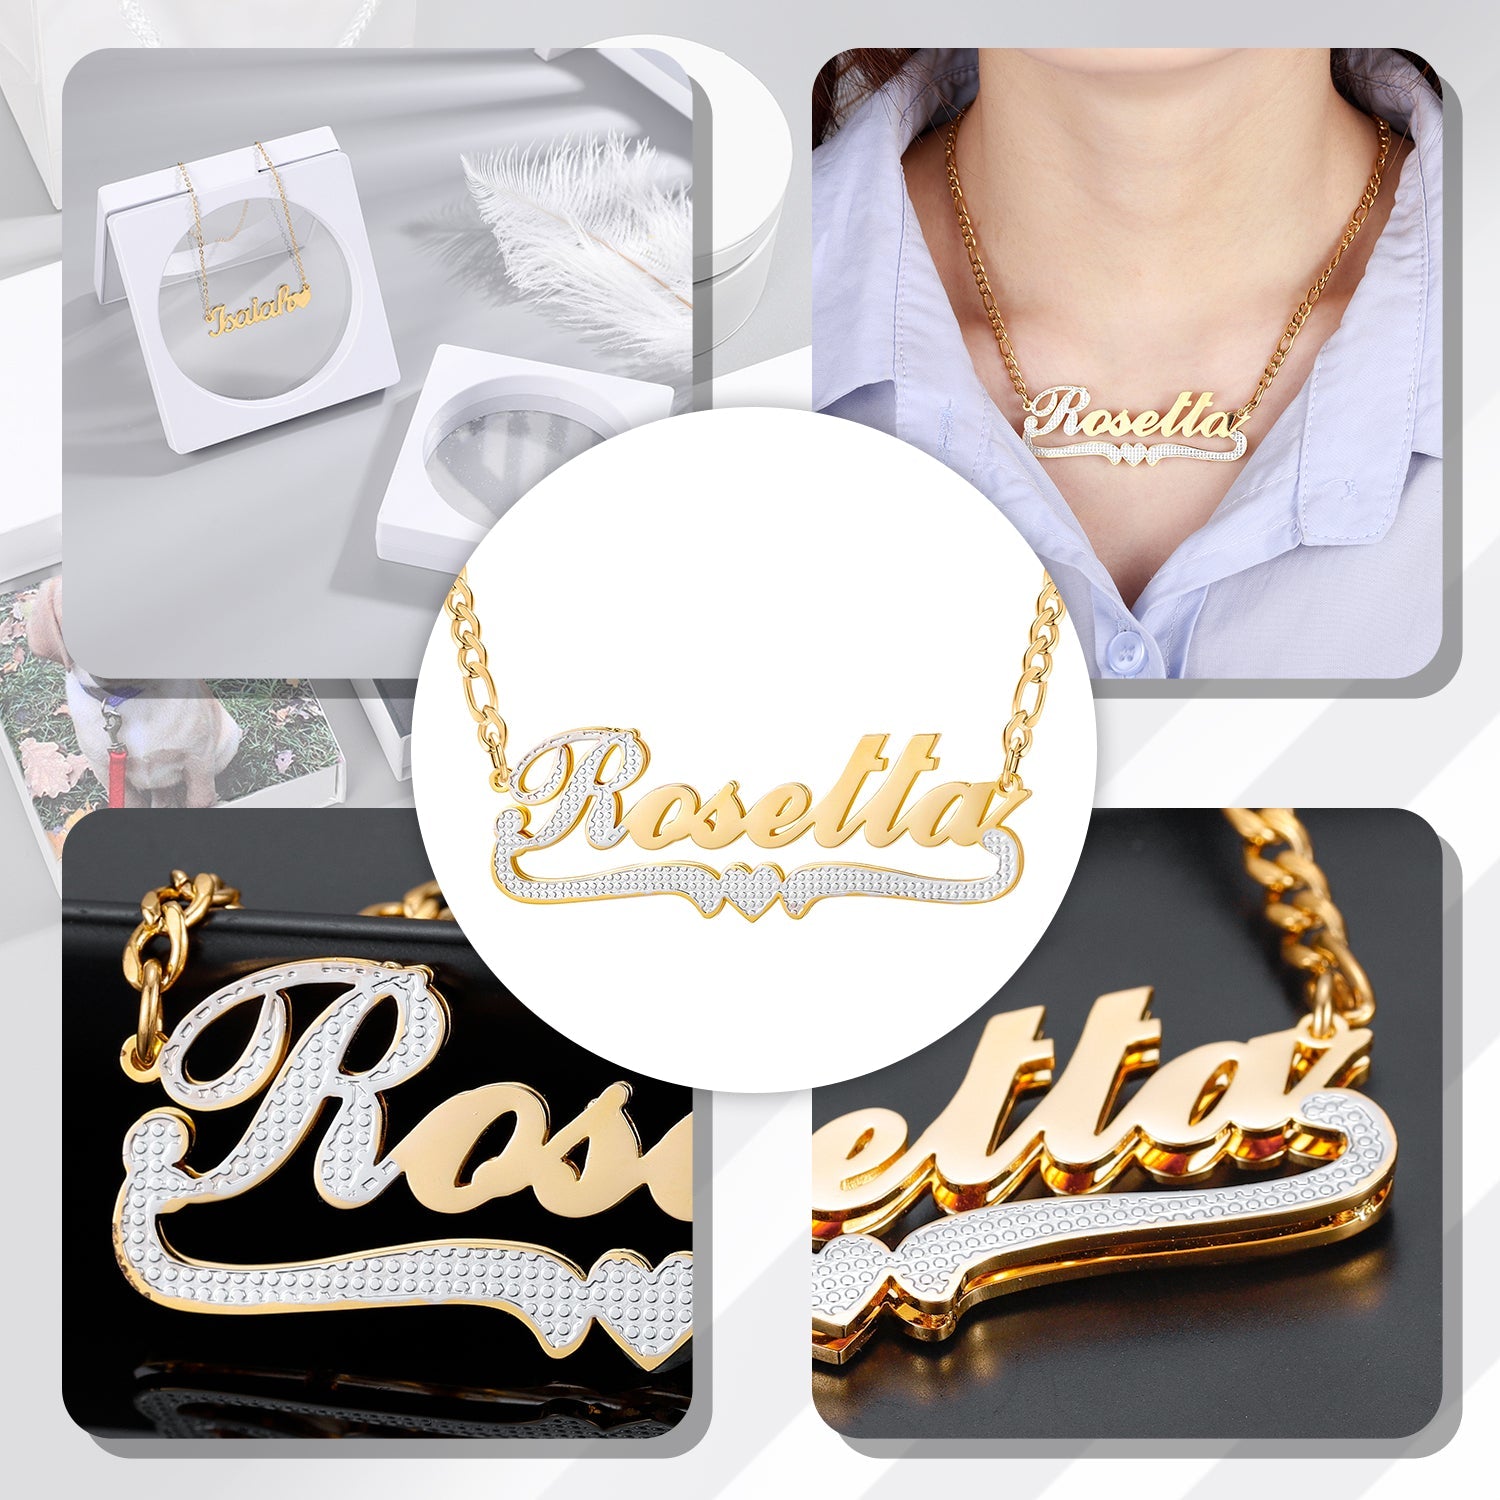 Double Plated Name Necklace | Iced Out